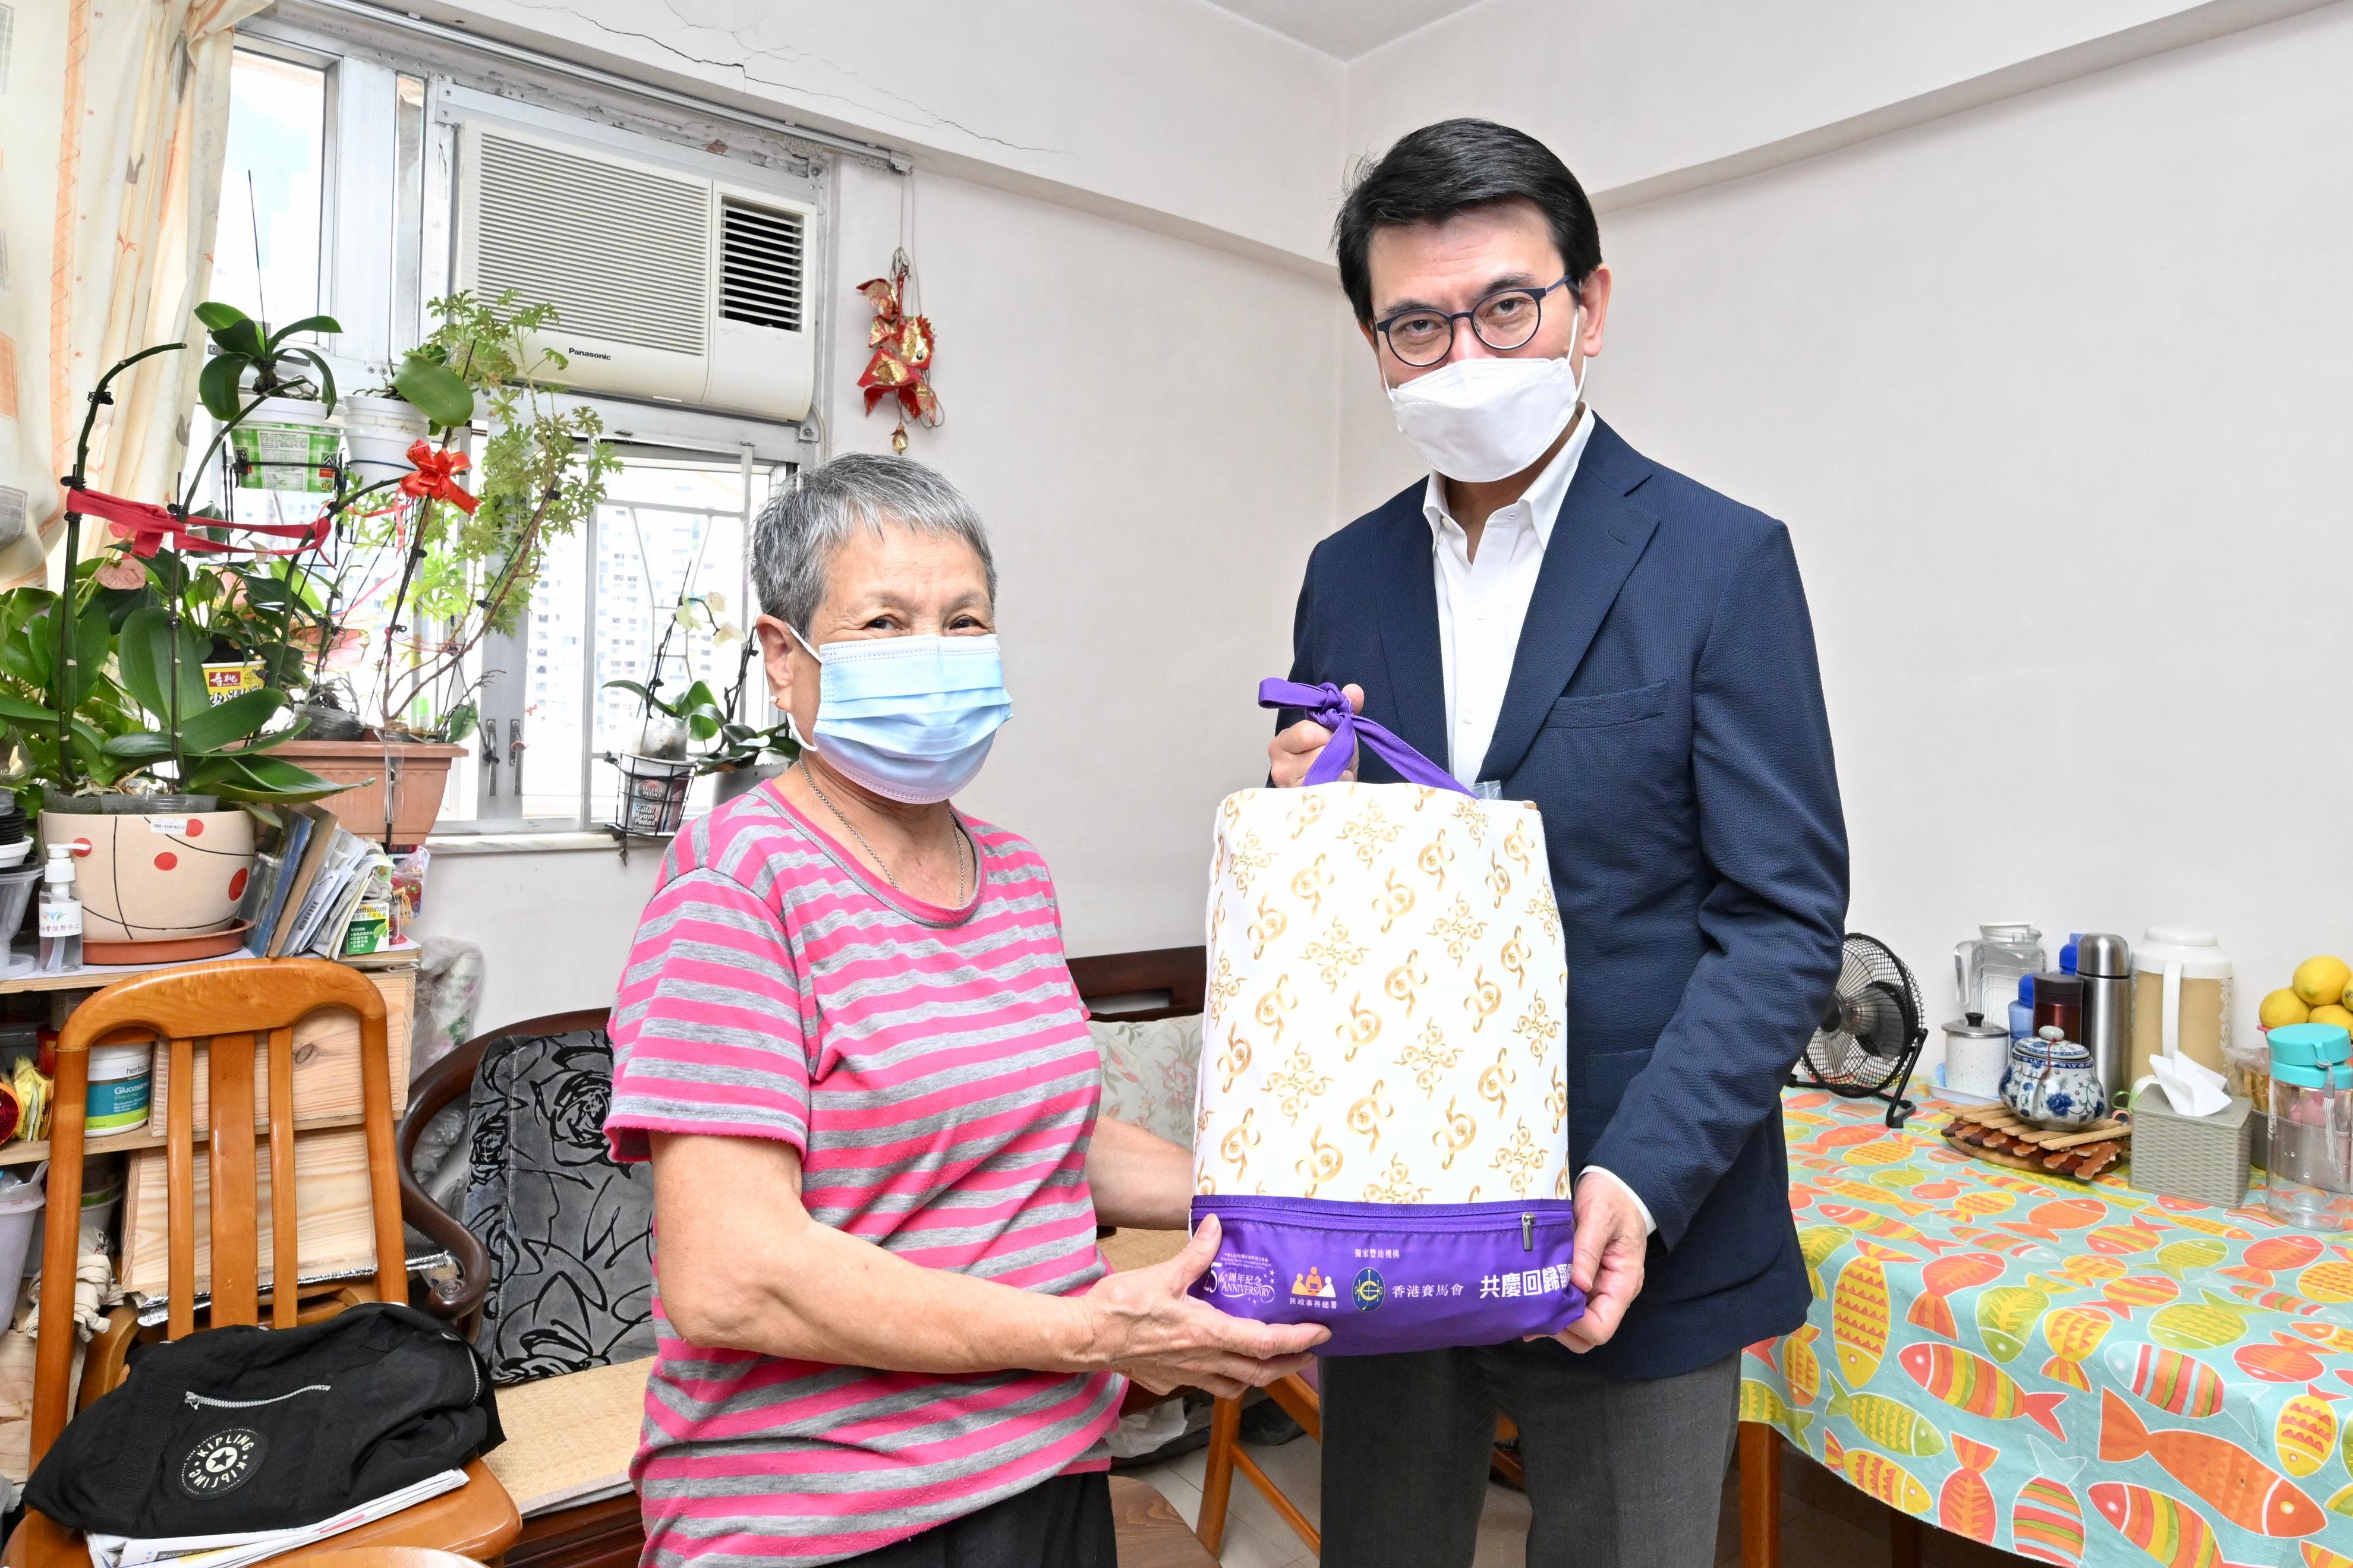 The Secretary for Commerce and Economic Development, Mr Edward Yau, paid home visits under the Celebrations for All project in Central and Western District today (June 21). Photo shows Mr Yau (right) visiting a single elderly person and giving her a gift pack in celebration of the 25th anniversary of the establishment of the Hong Kong Special Administrative Region.